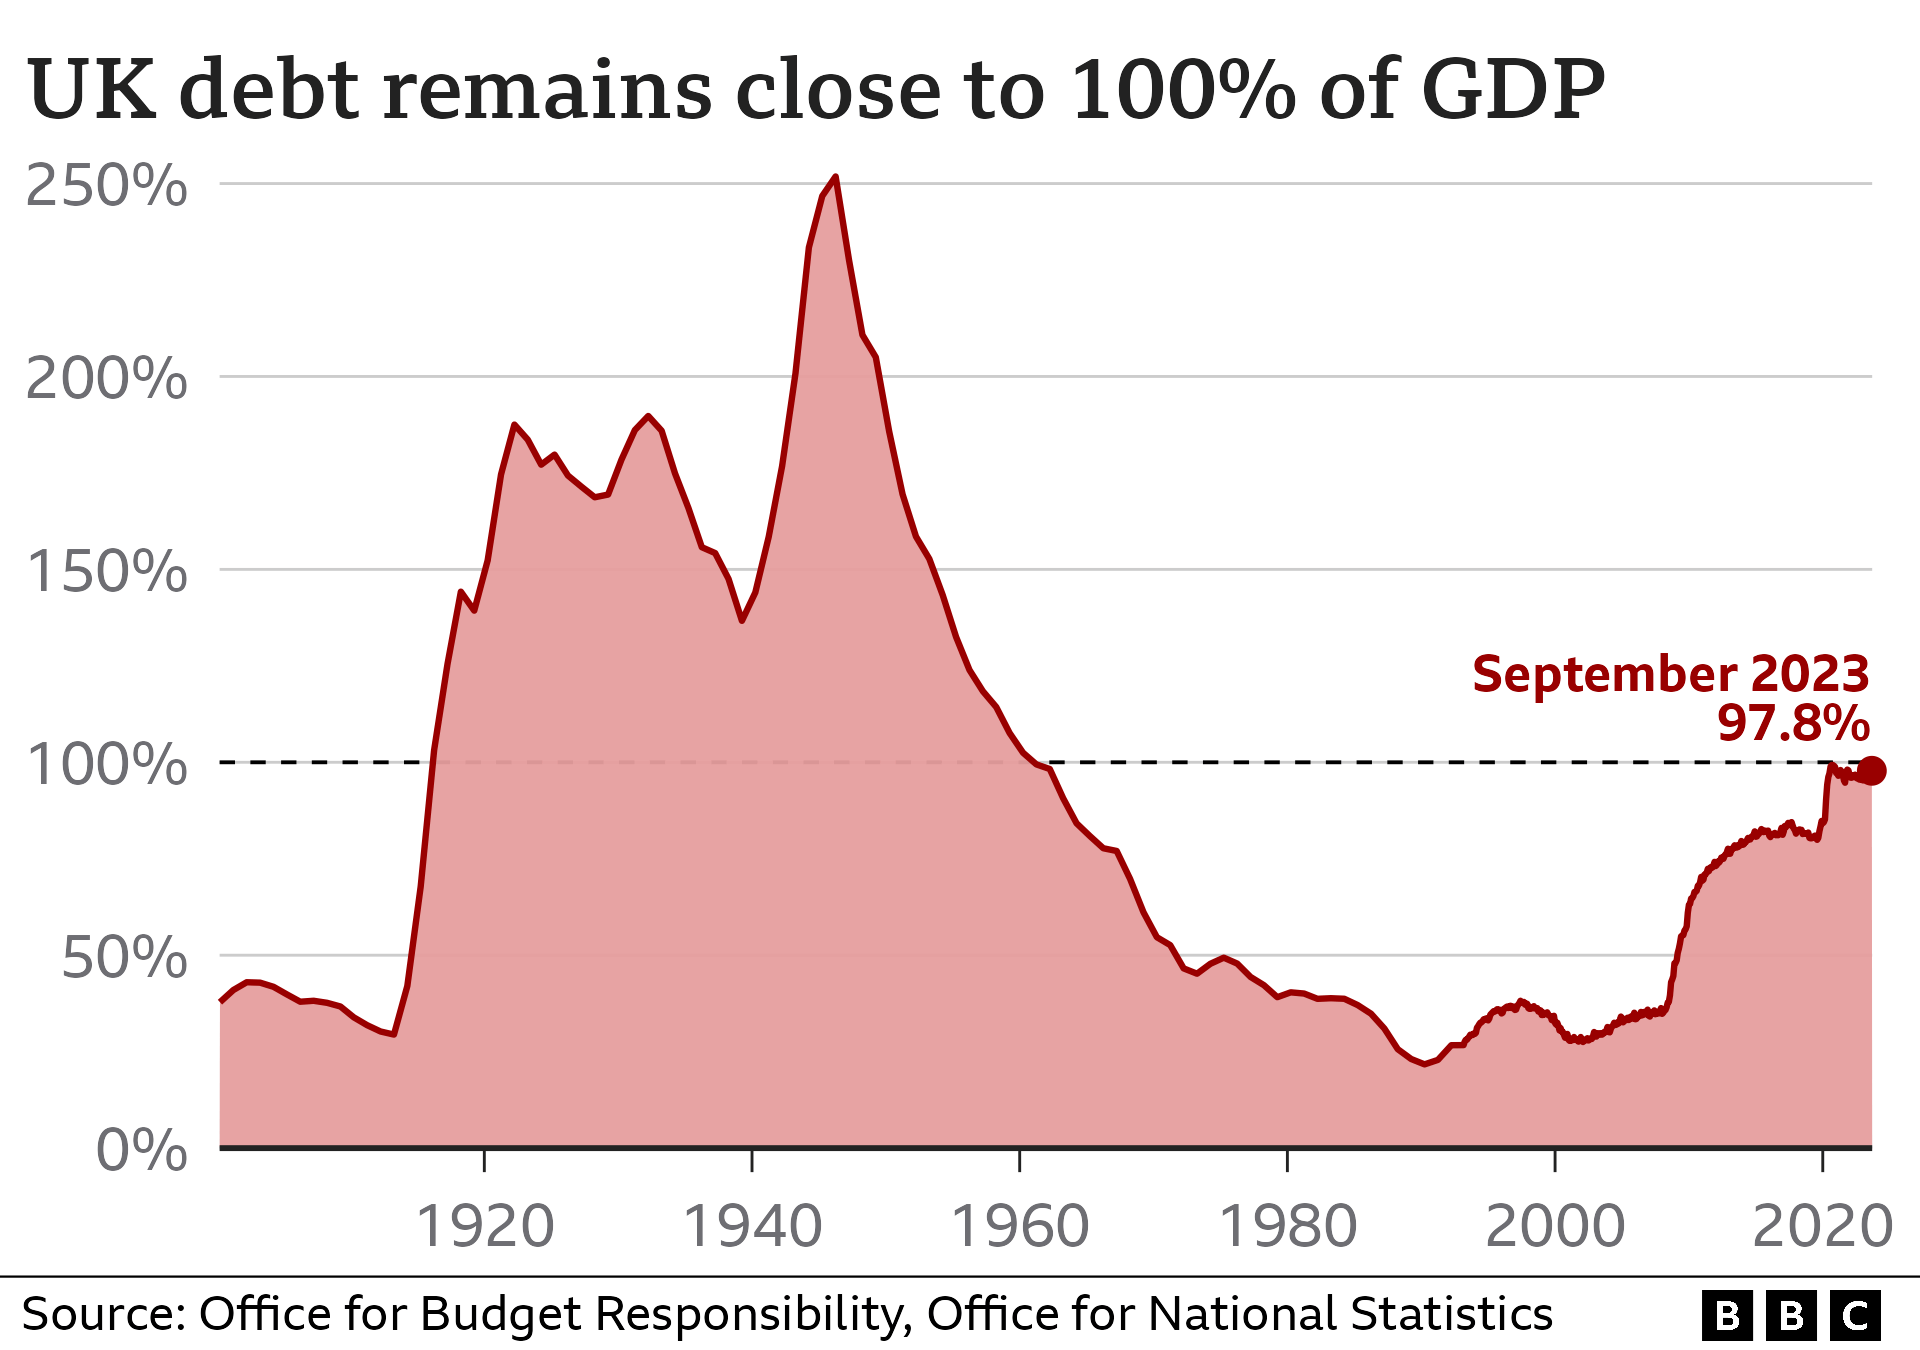 Line graph showing public sector debt, excluding public banks, as a percentage of GDP.  It increased from around 28% in 2002 to 97.8% in September 2023.